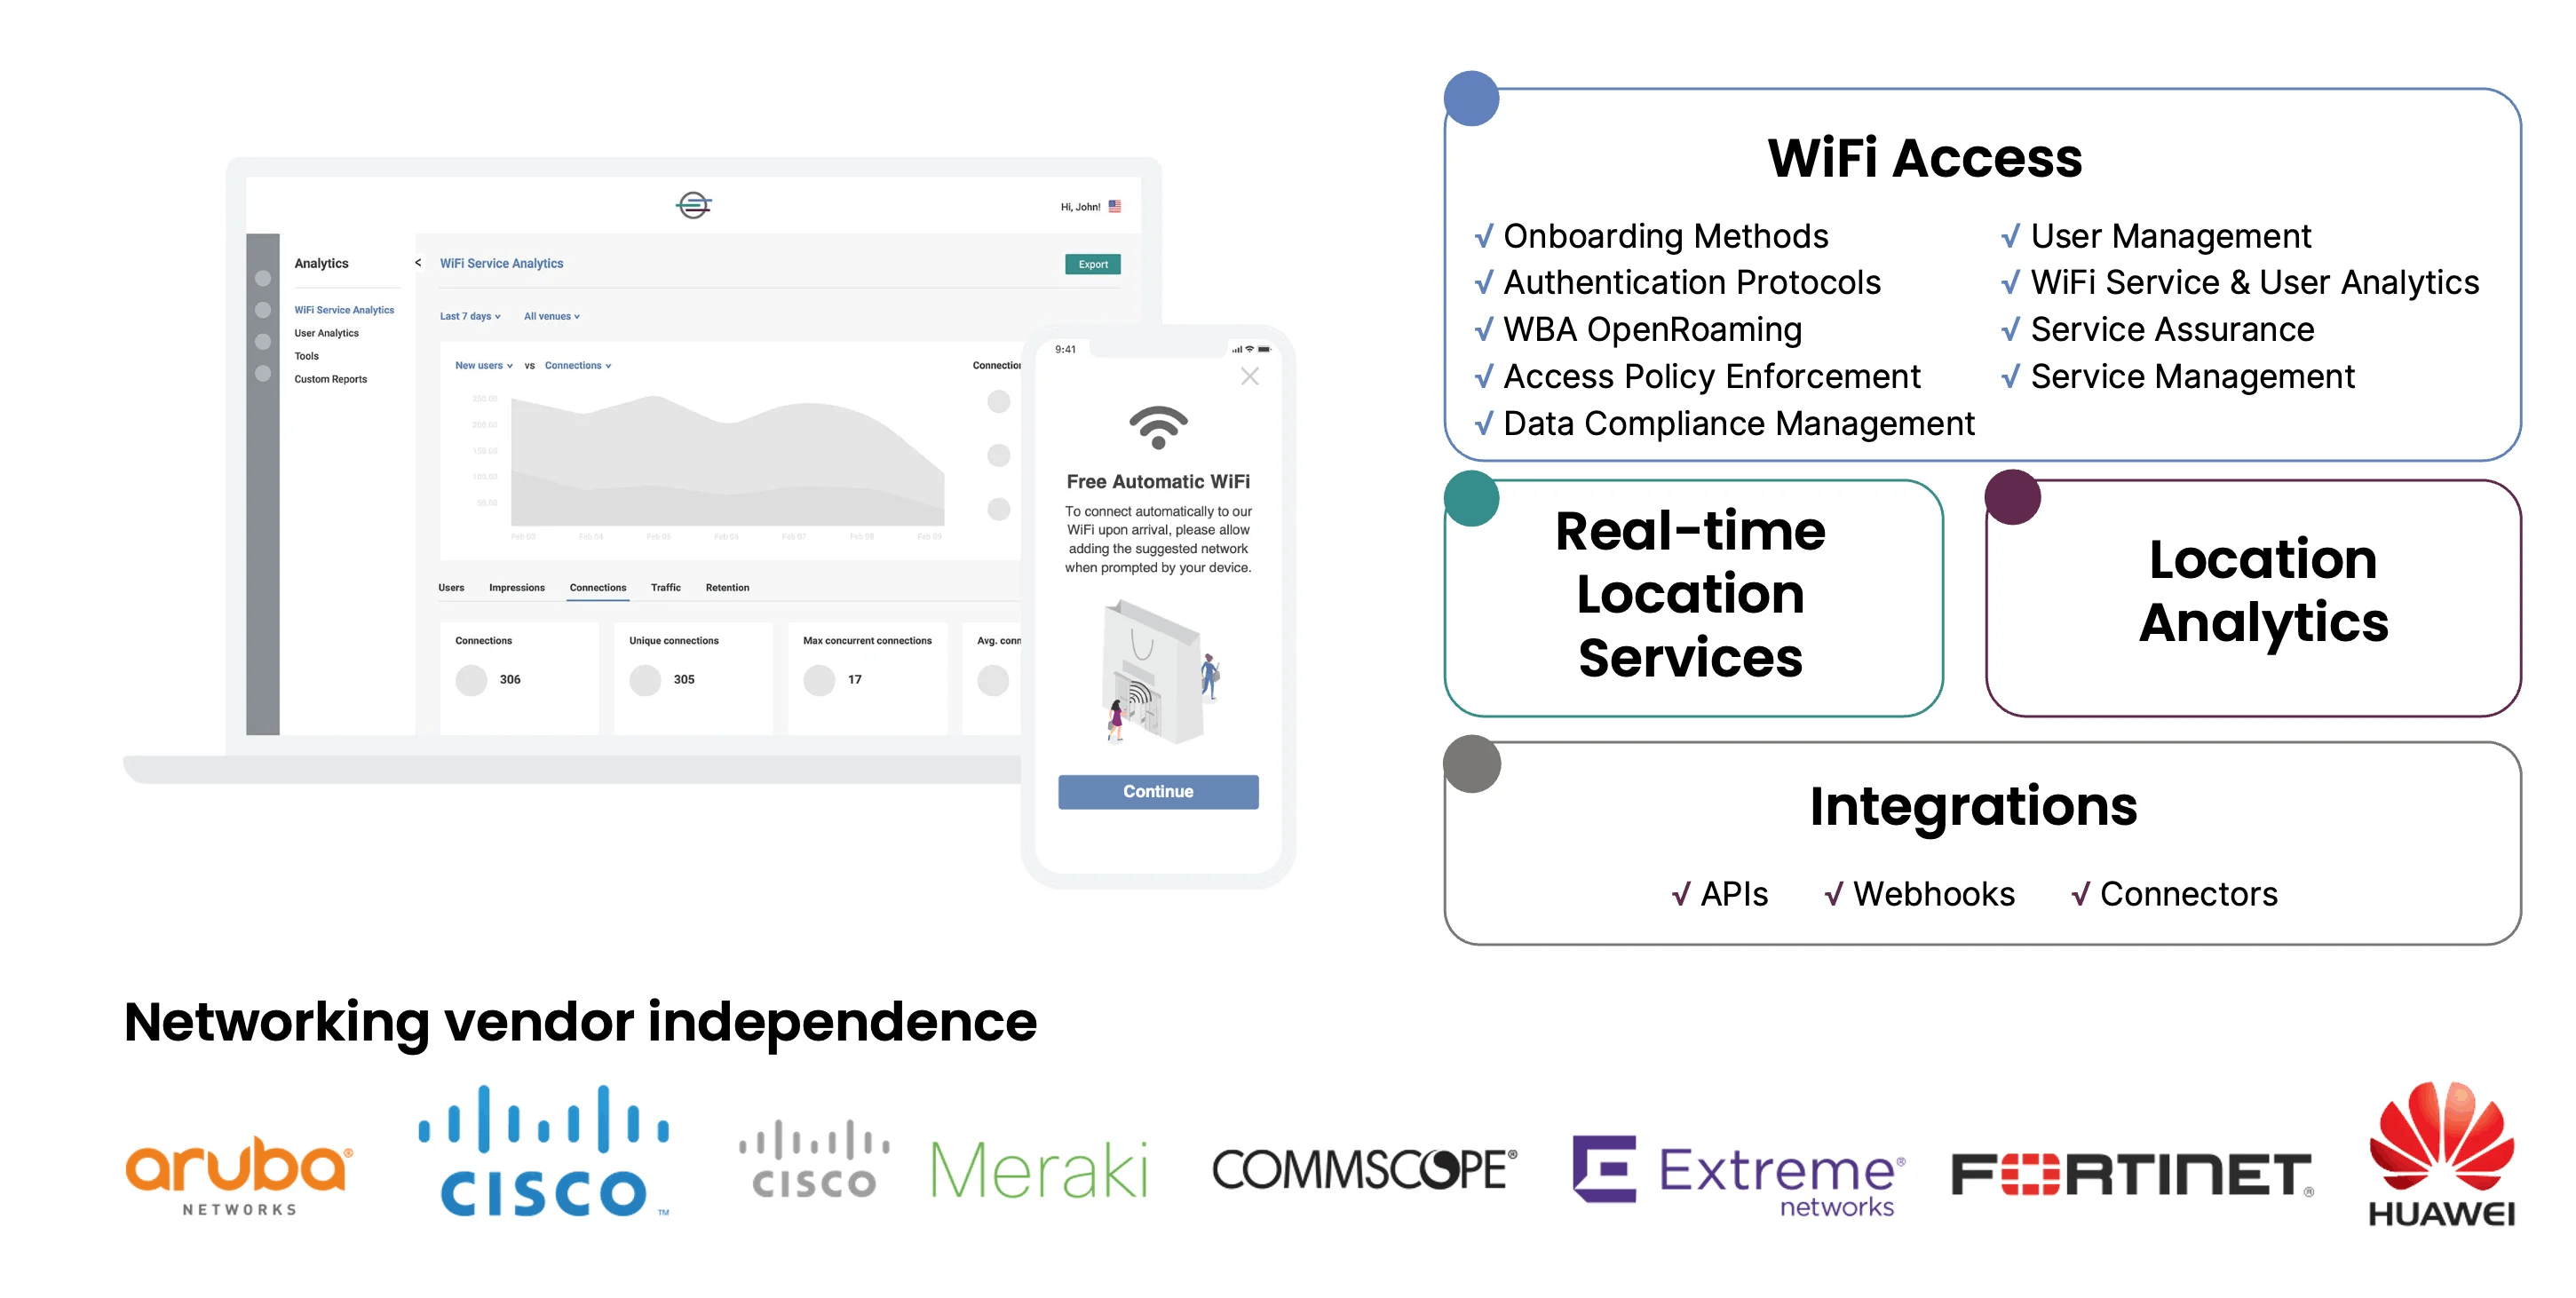 Cloud4Wi features at a glance